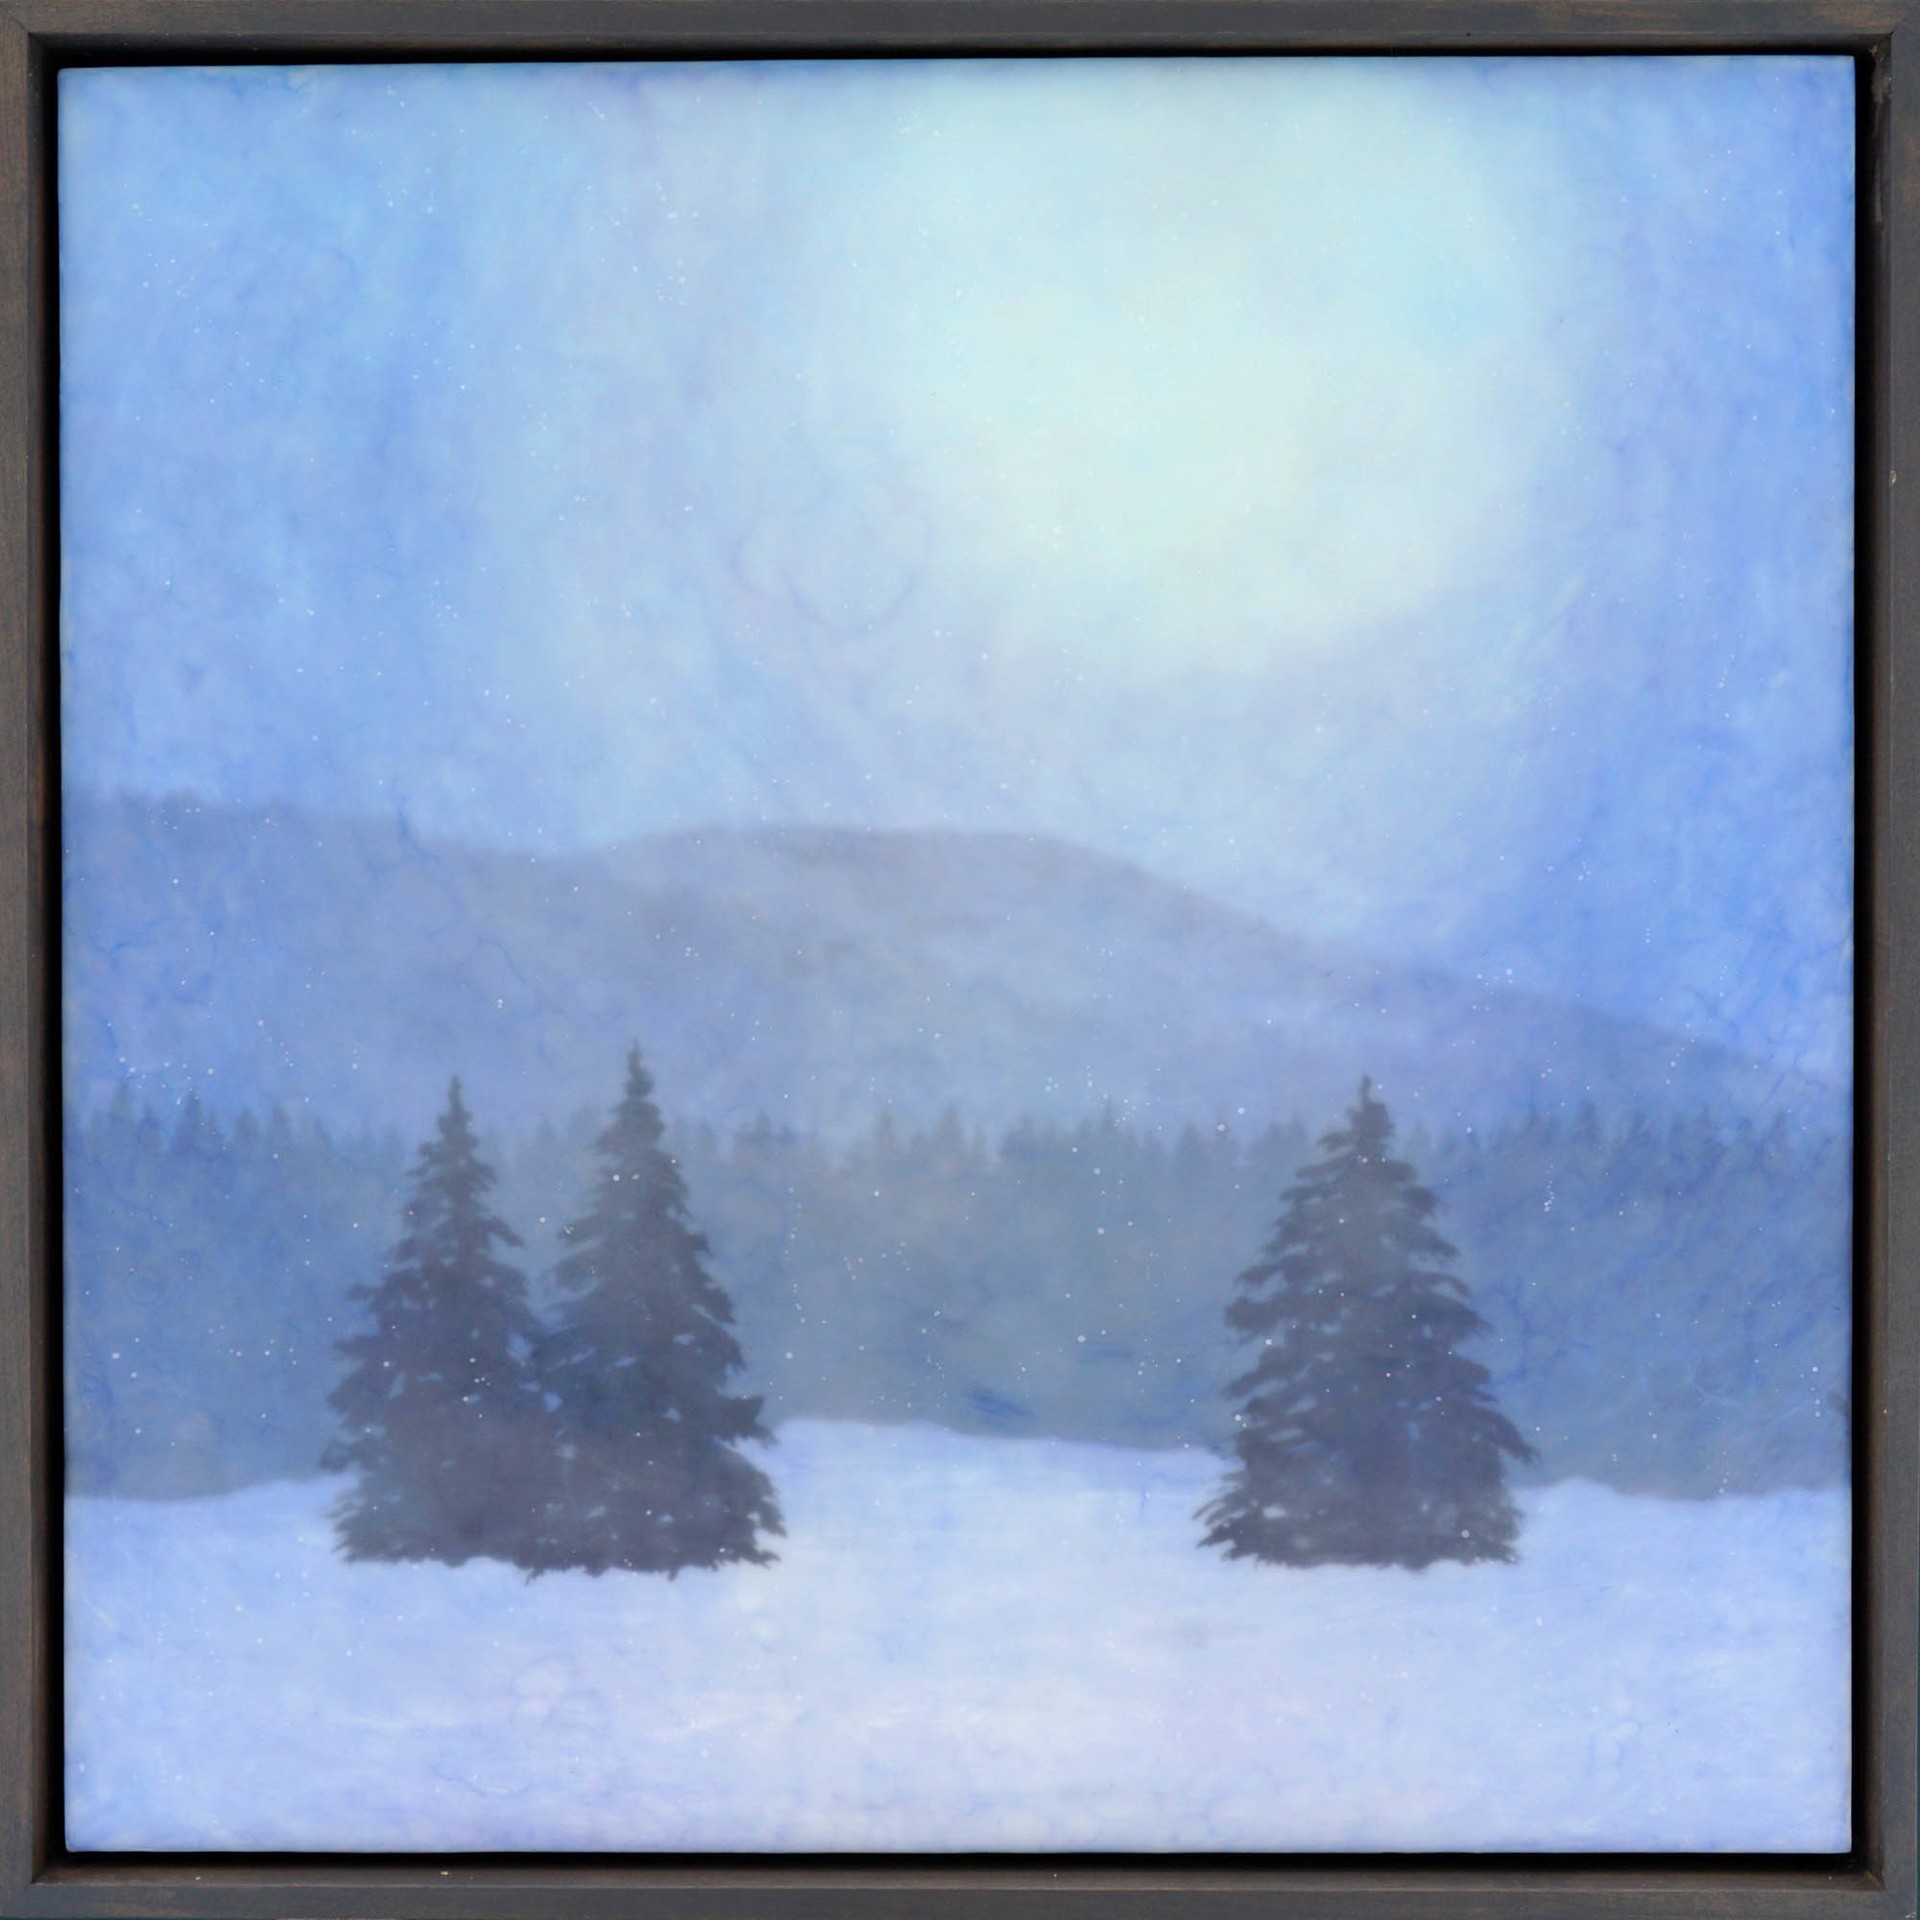 Original Encaustic Painting By Bridgette Meinhold Featuring A Snowy Rolling Hill Landscape With Pine Trees